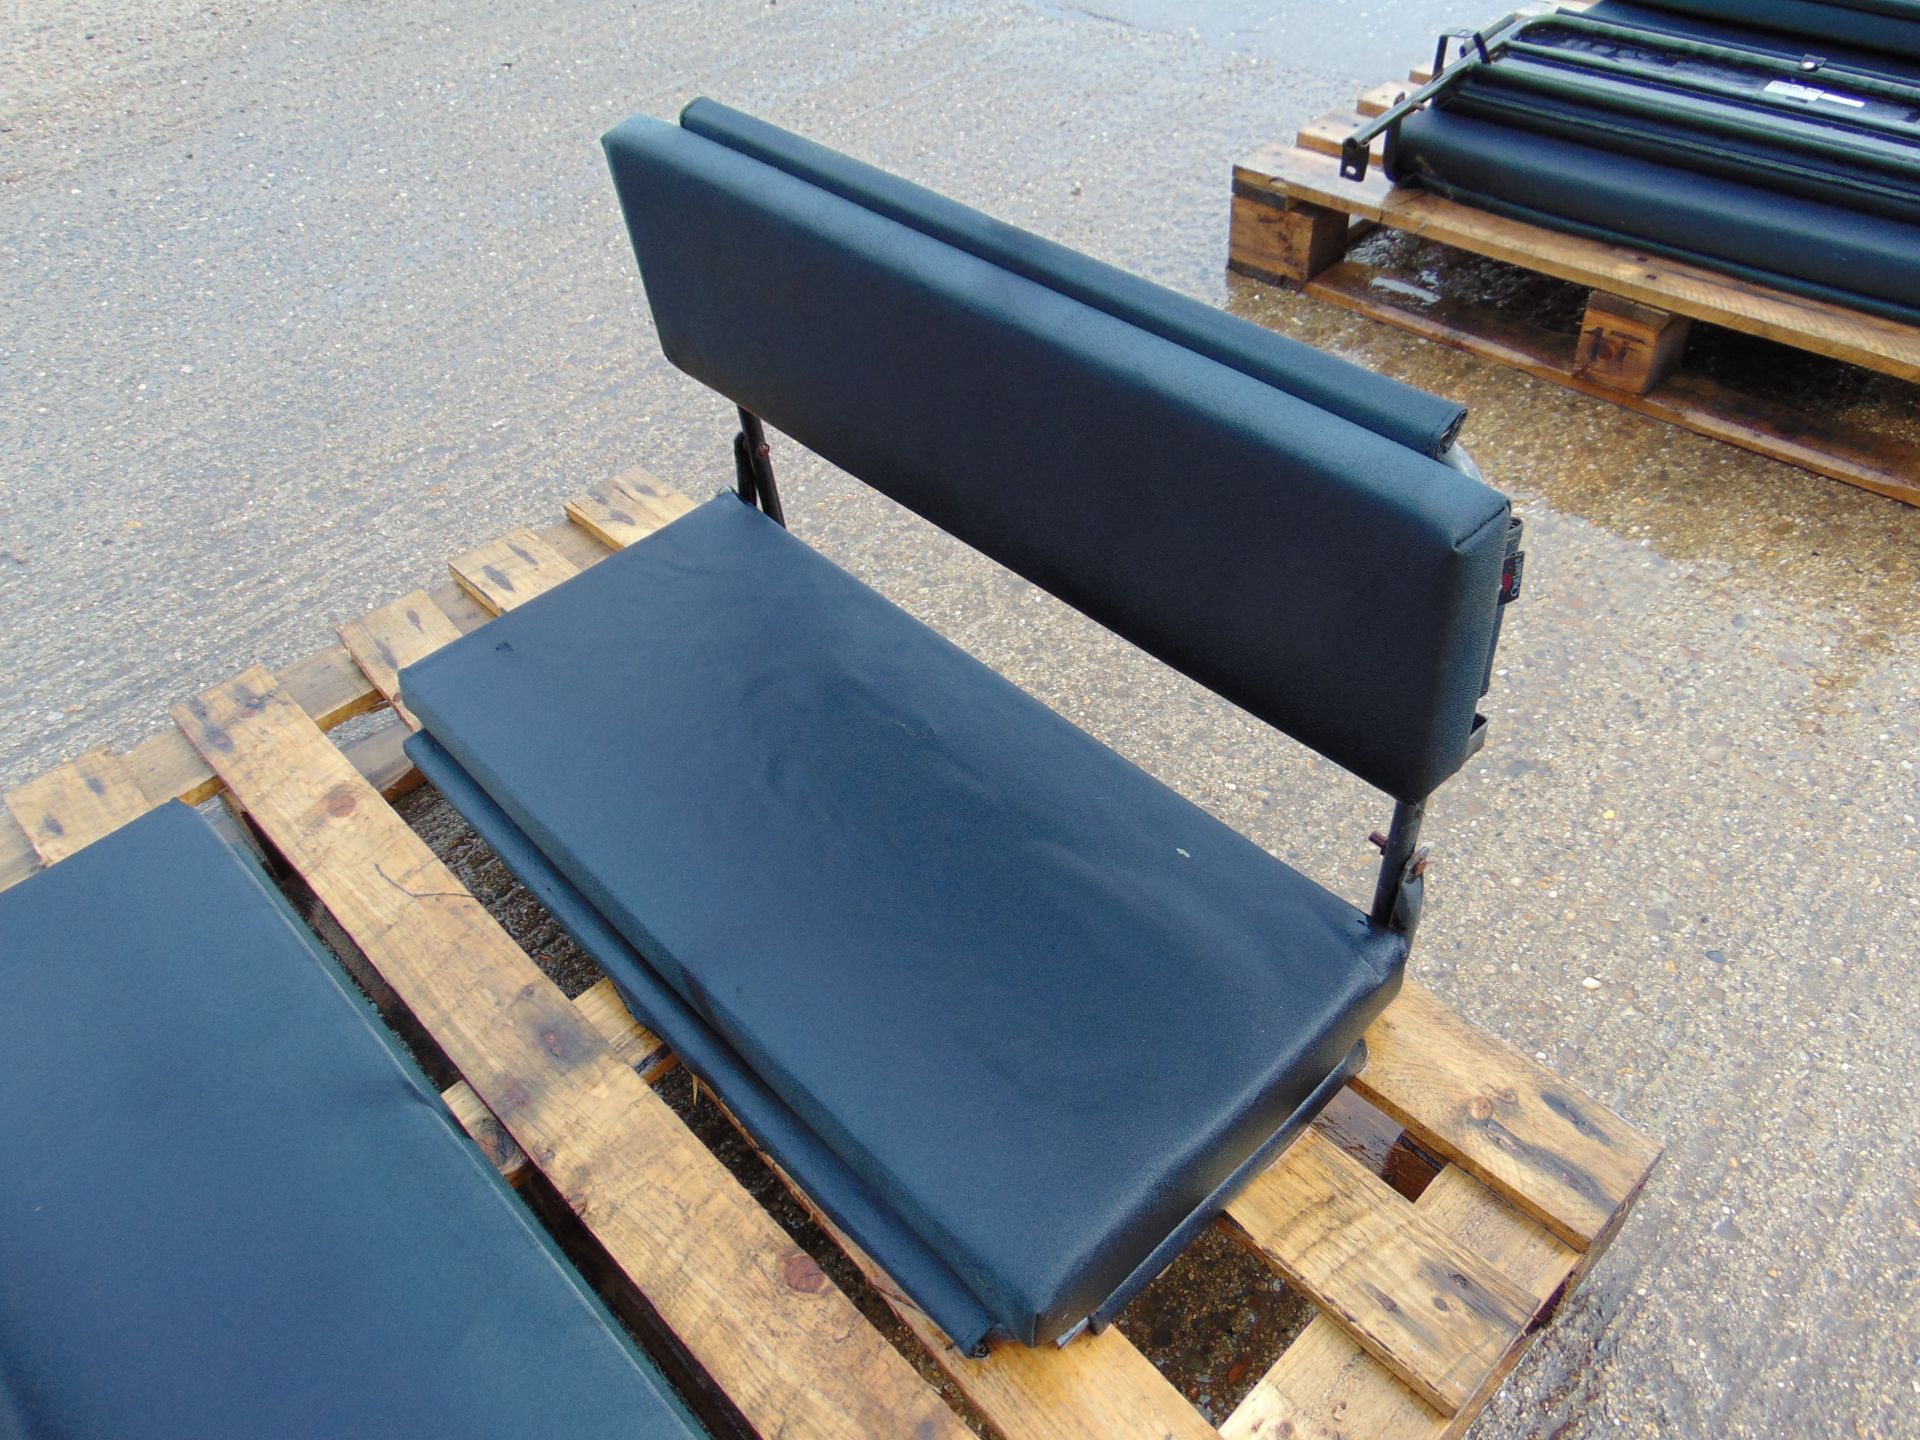 2 x Exmoor Trim Land Rover Defender Fold Down Rear Bench Seats - Image 3 of 5